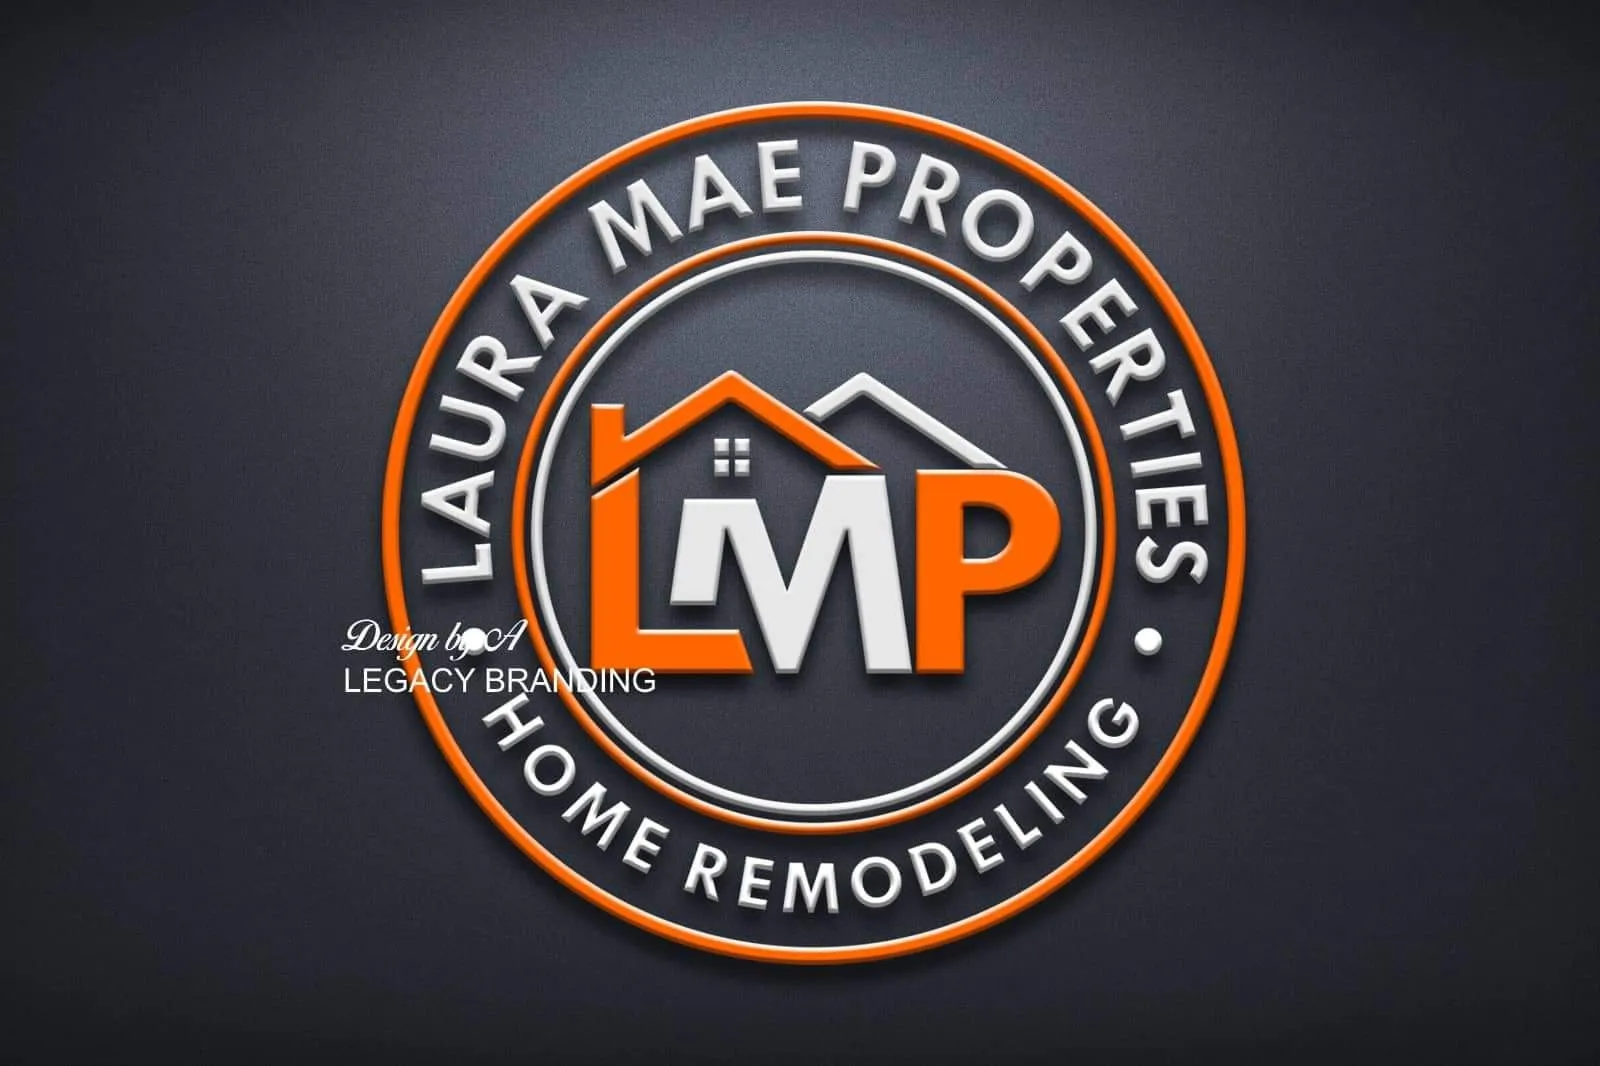 Remodeling for Laura Mae Properties in Wolcott, CT